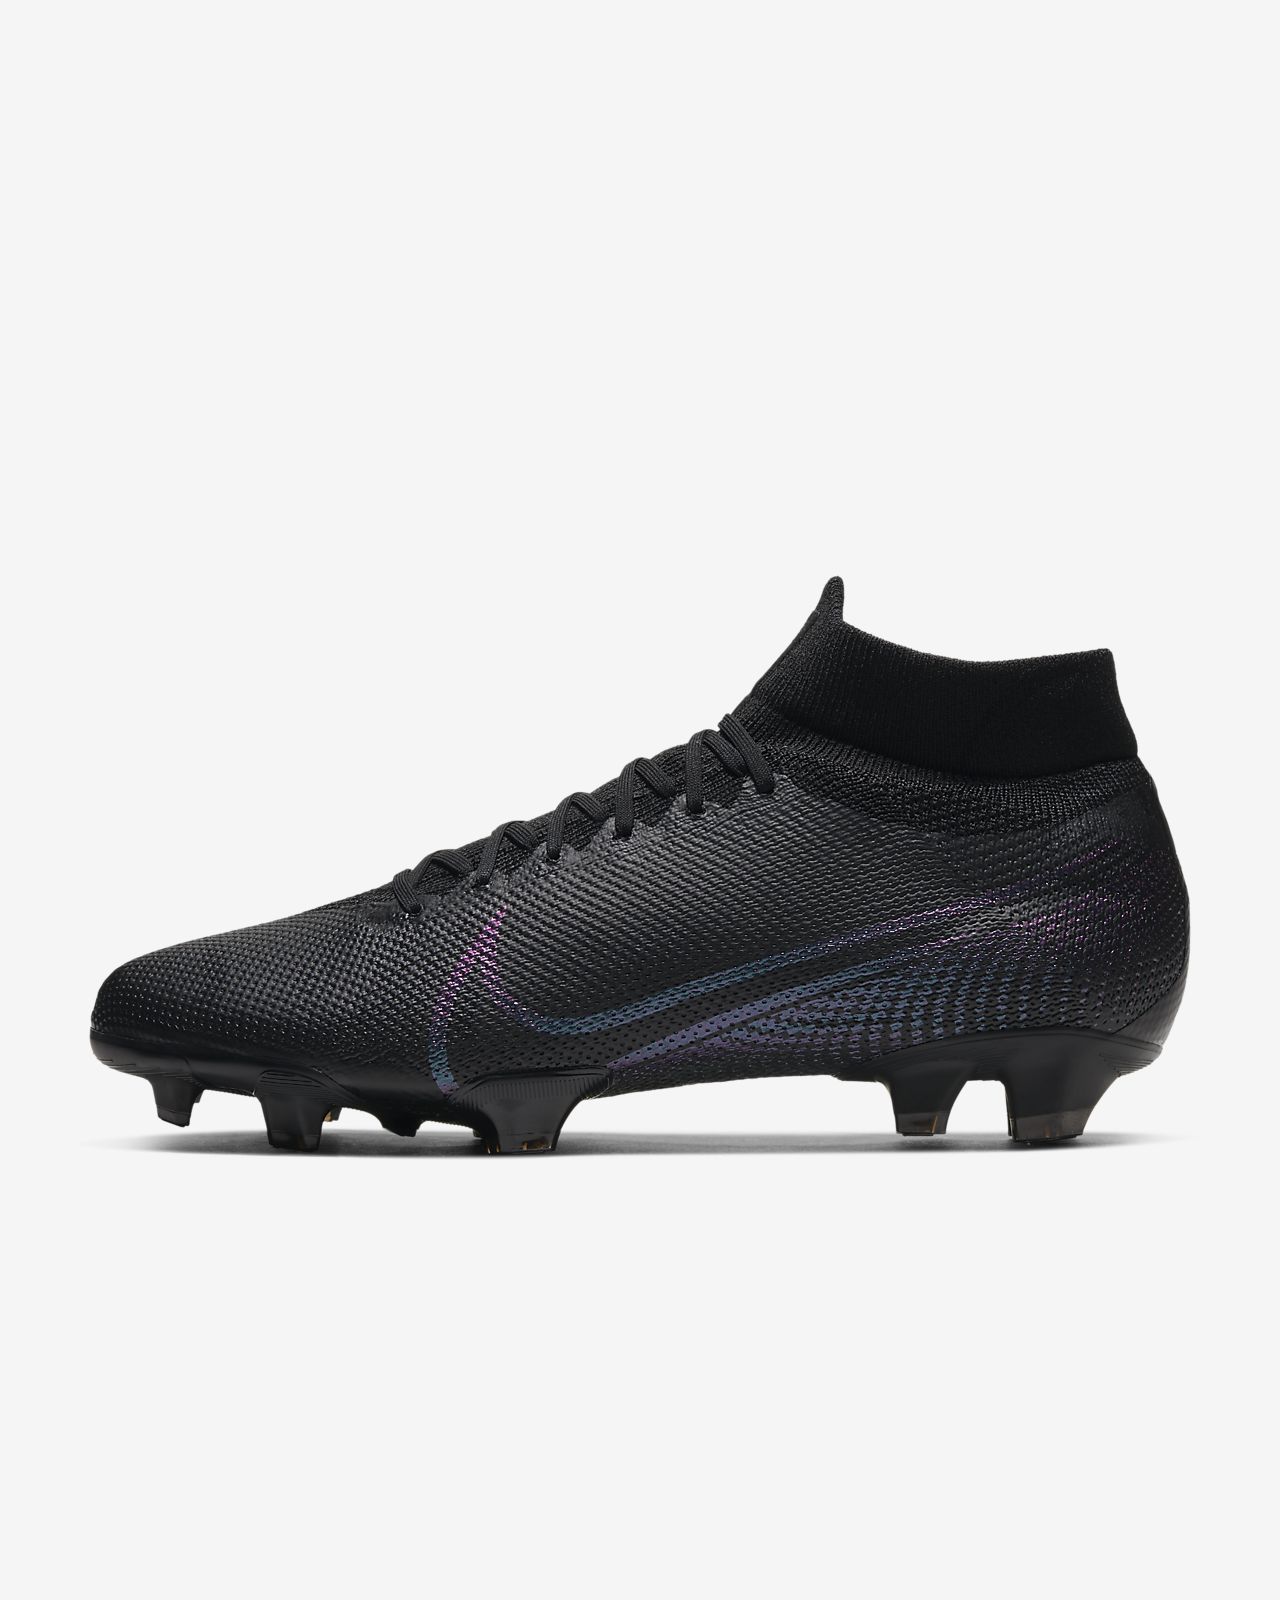 Nike Mercurial Superfly VI Academy SG PRO football boots.